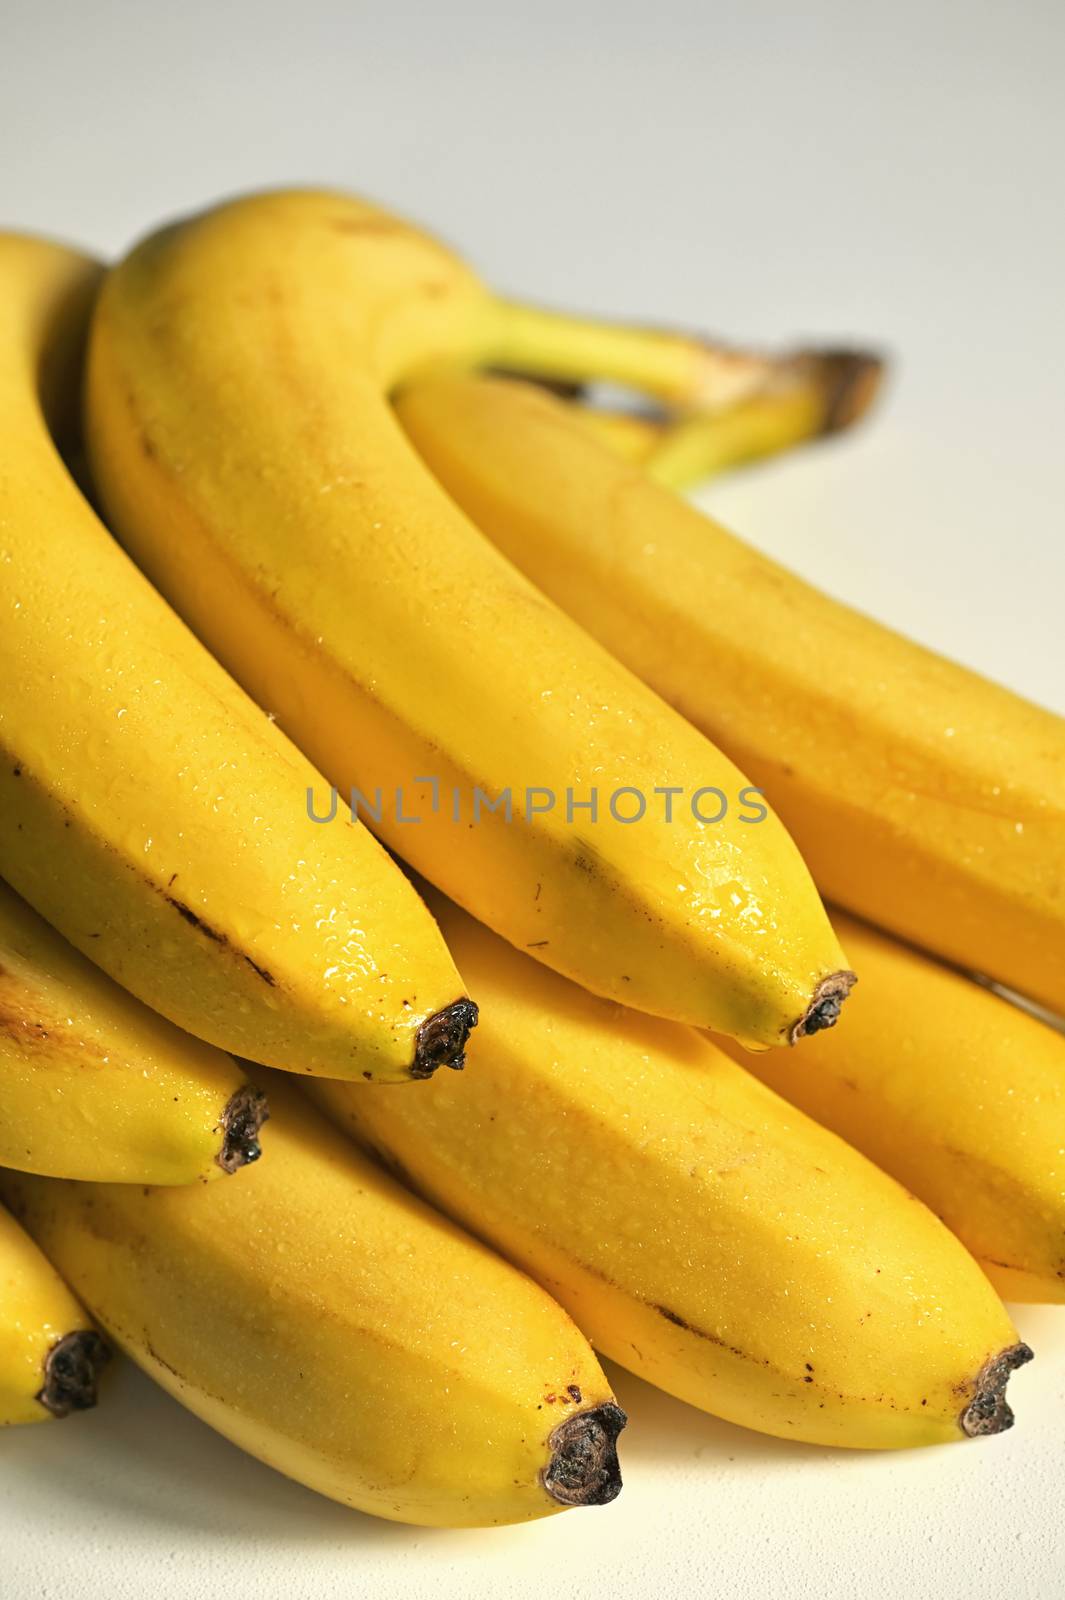 Bunch of raw ripe yellow bananas by mady70